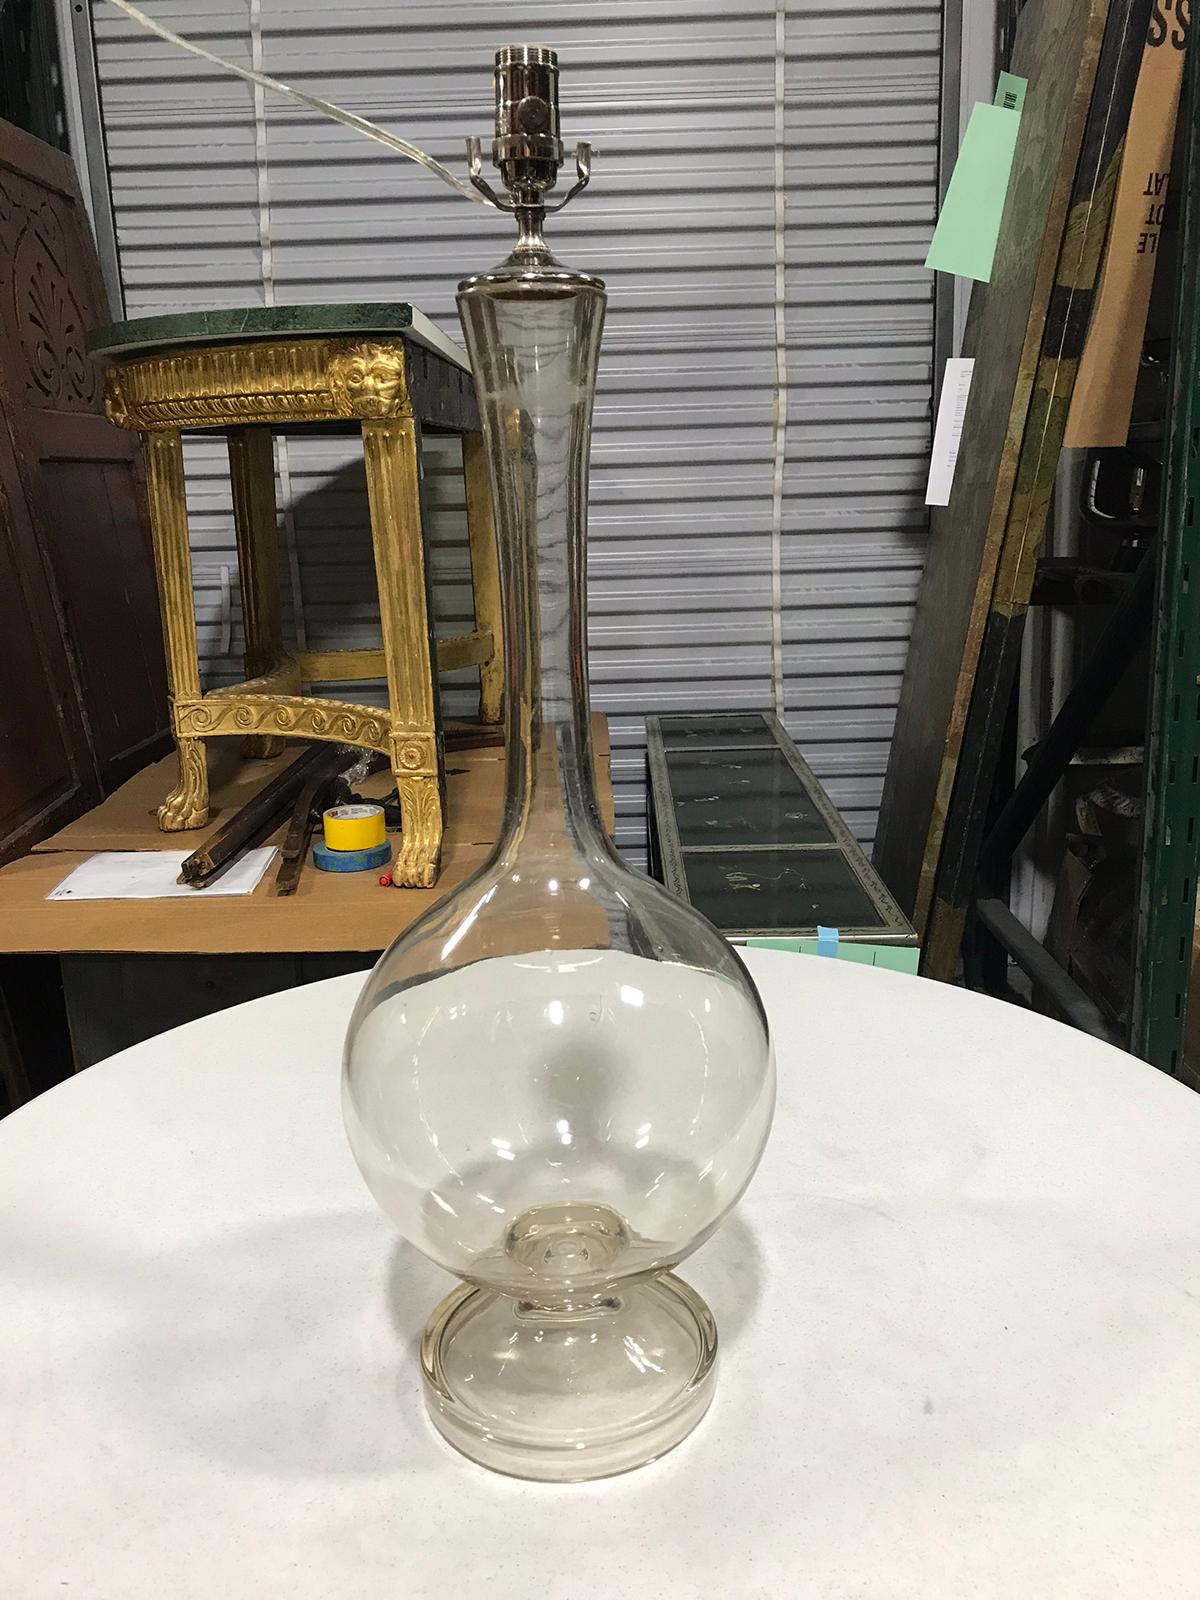 Early 20th century glass bottle as lamp
New wiring.